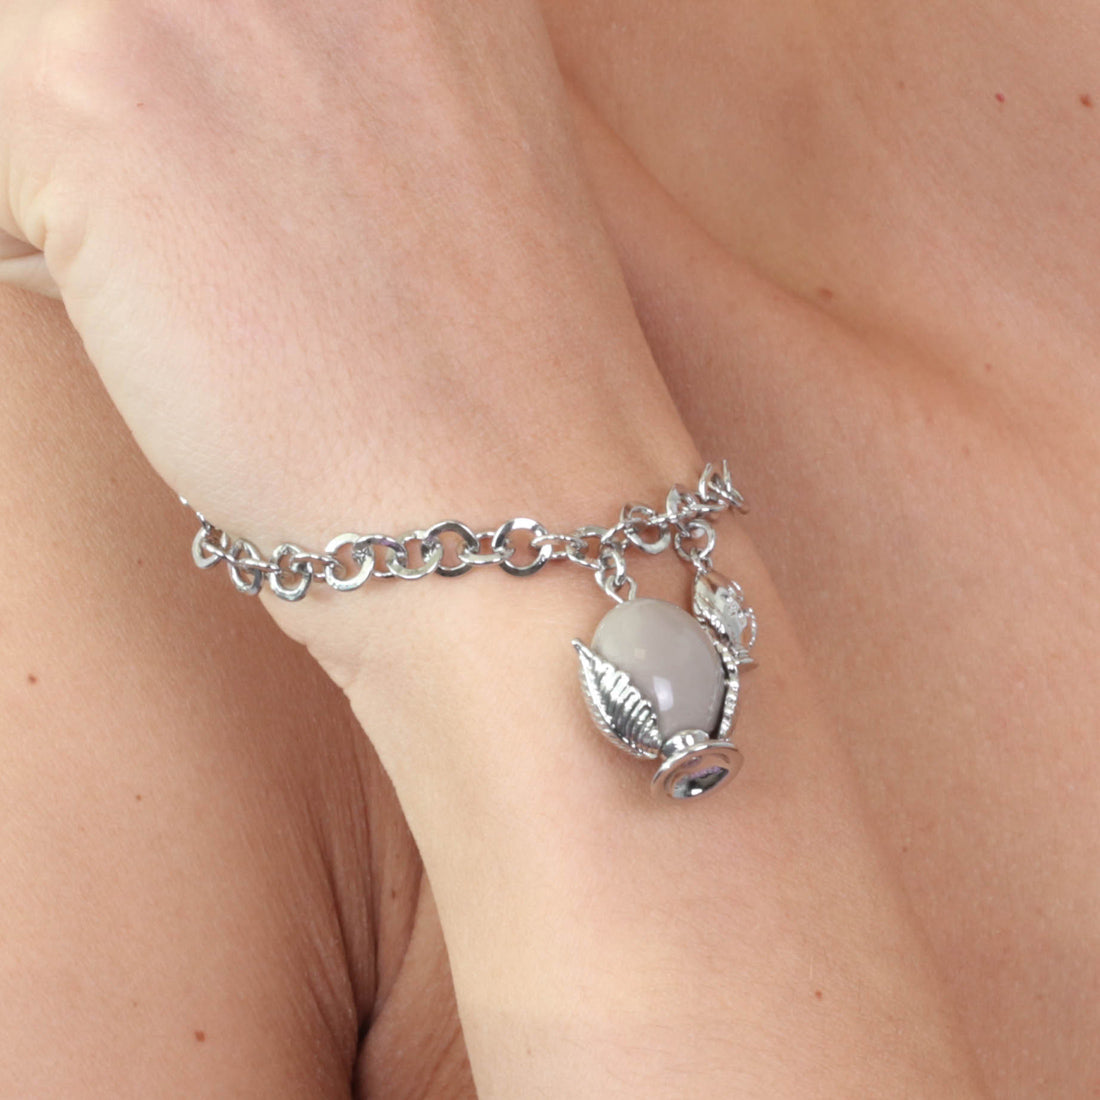 Metal bracelet with pendant Pugliese pumo, embellished with gray enamel and lateral mini pumo